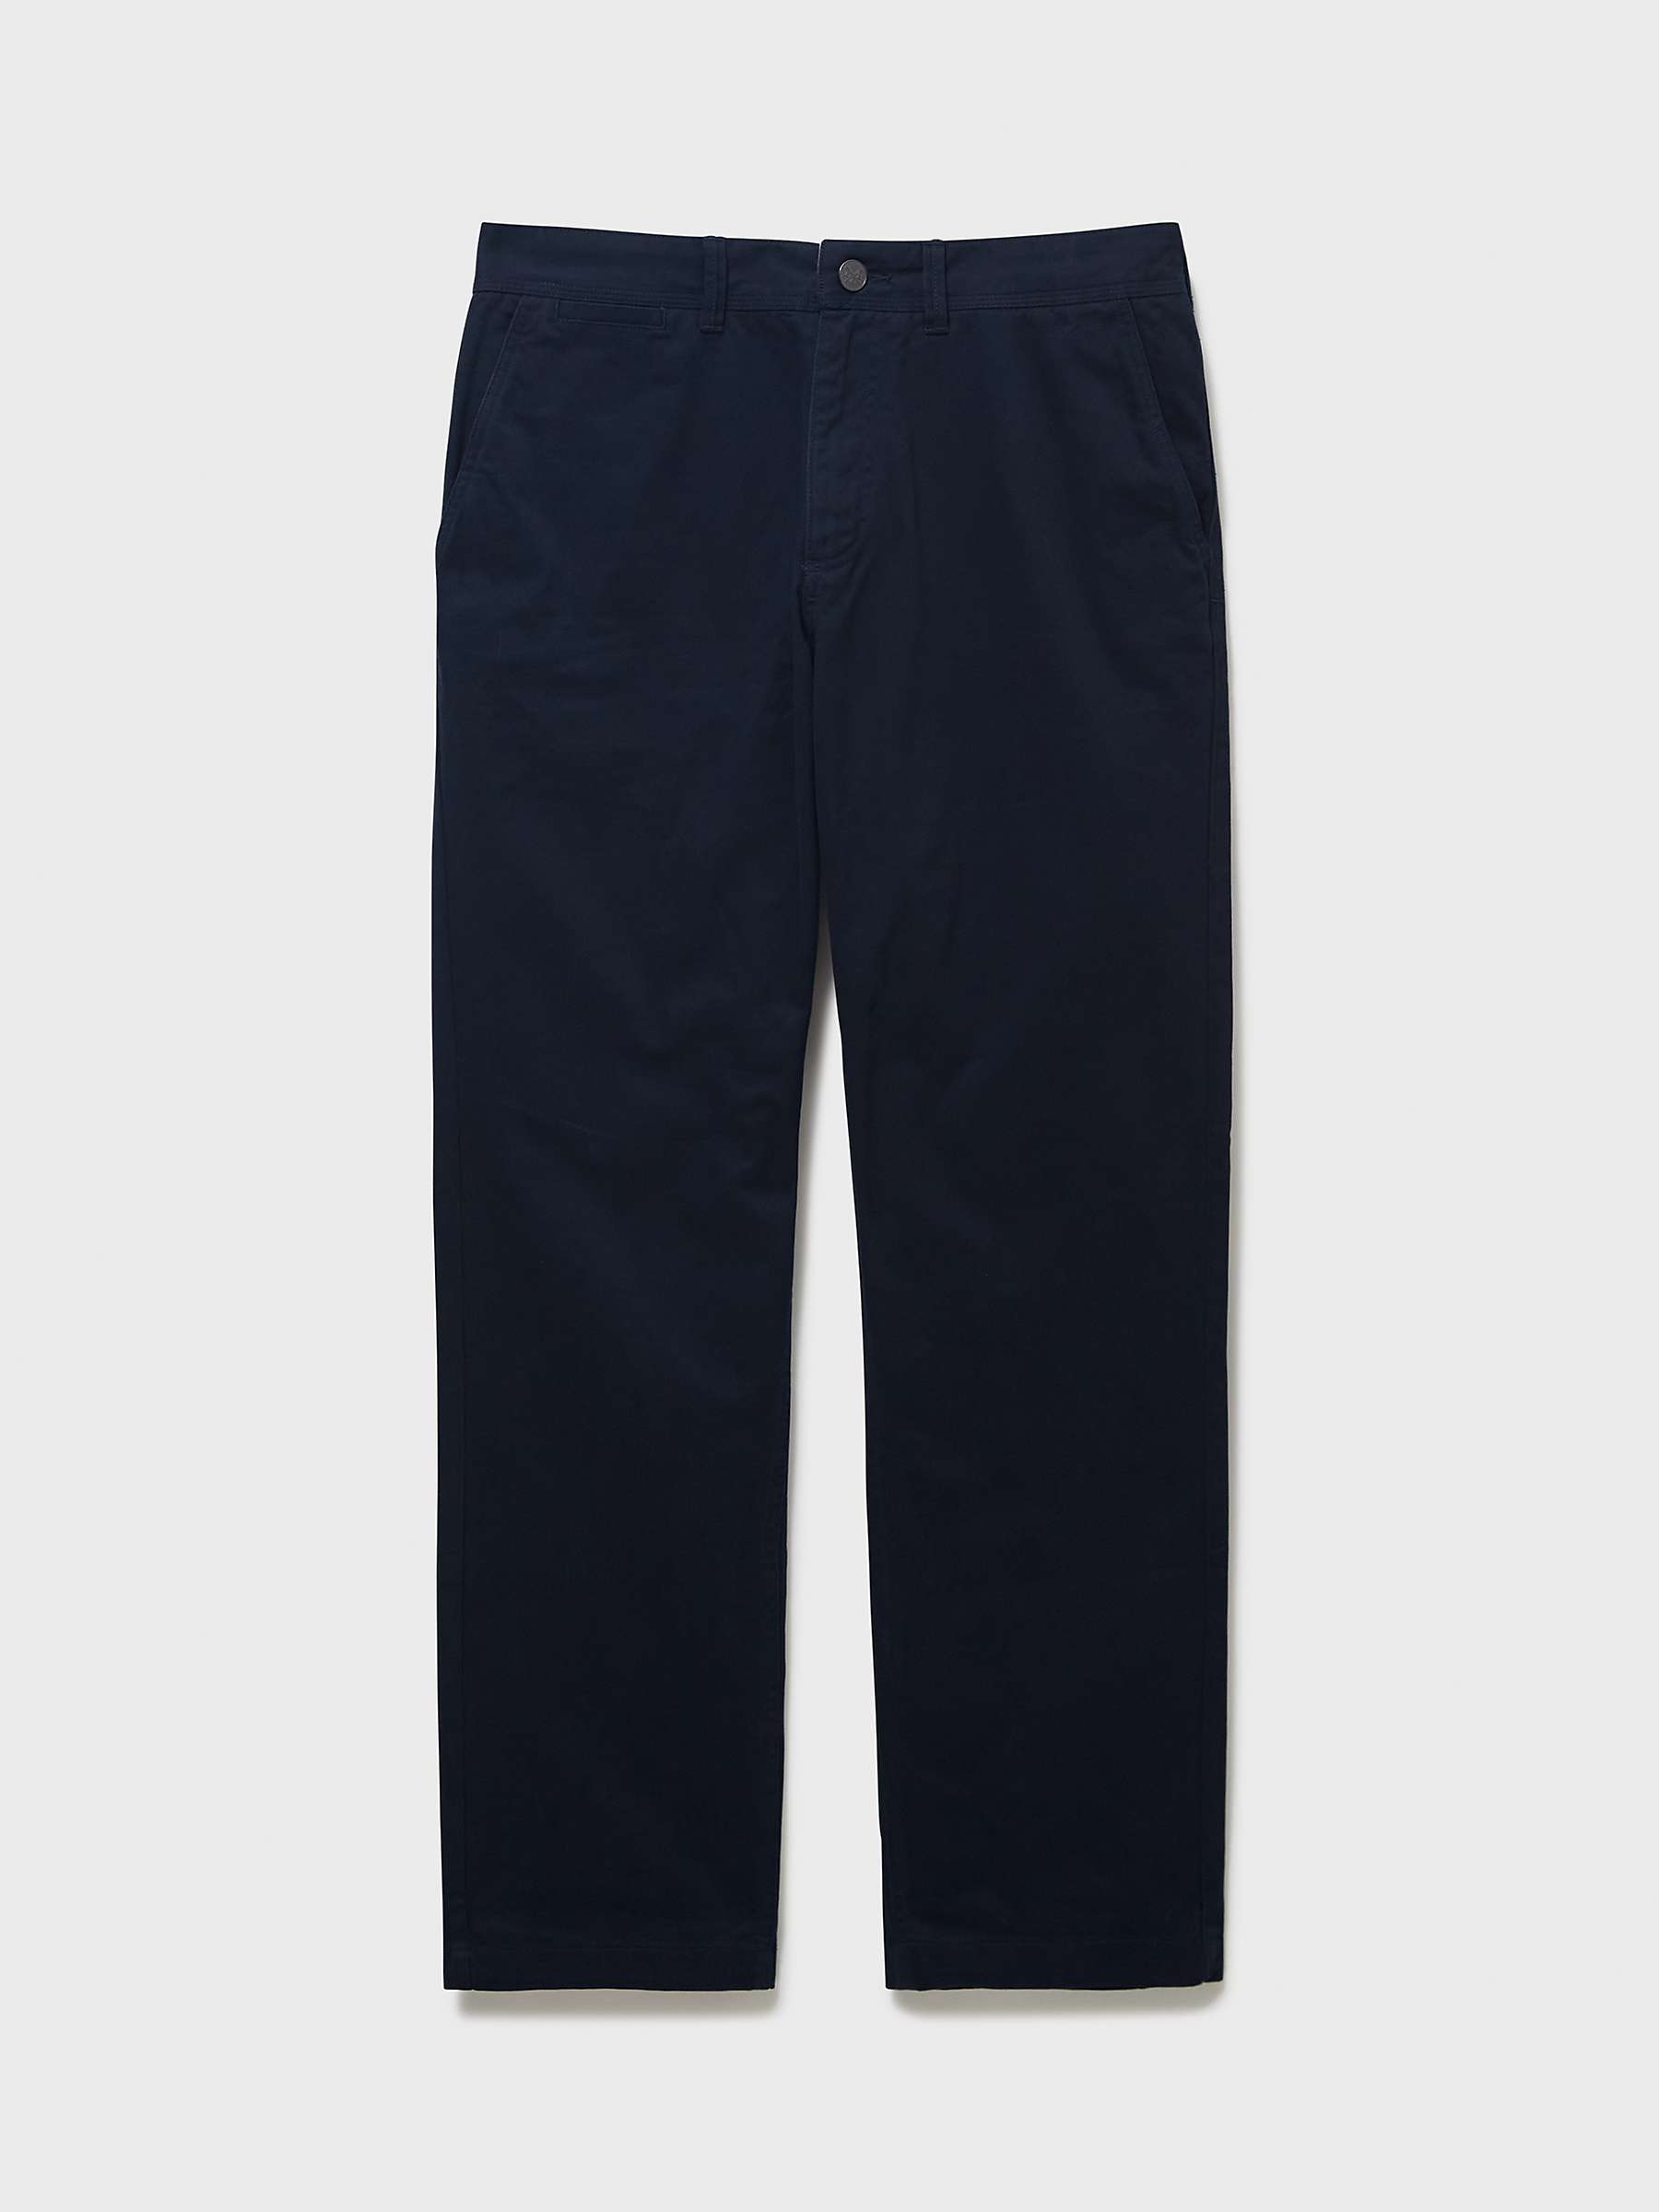 Buy Crew Clothing Vintage Chinos, Navy Online at johnlewis.com